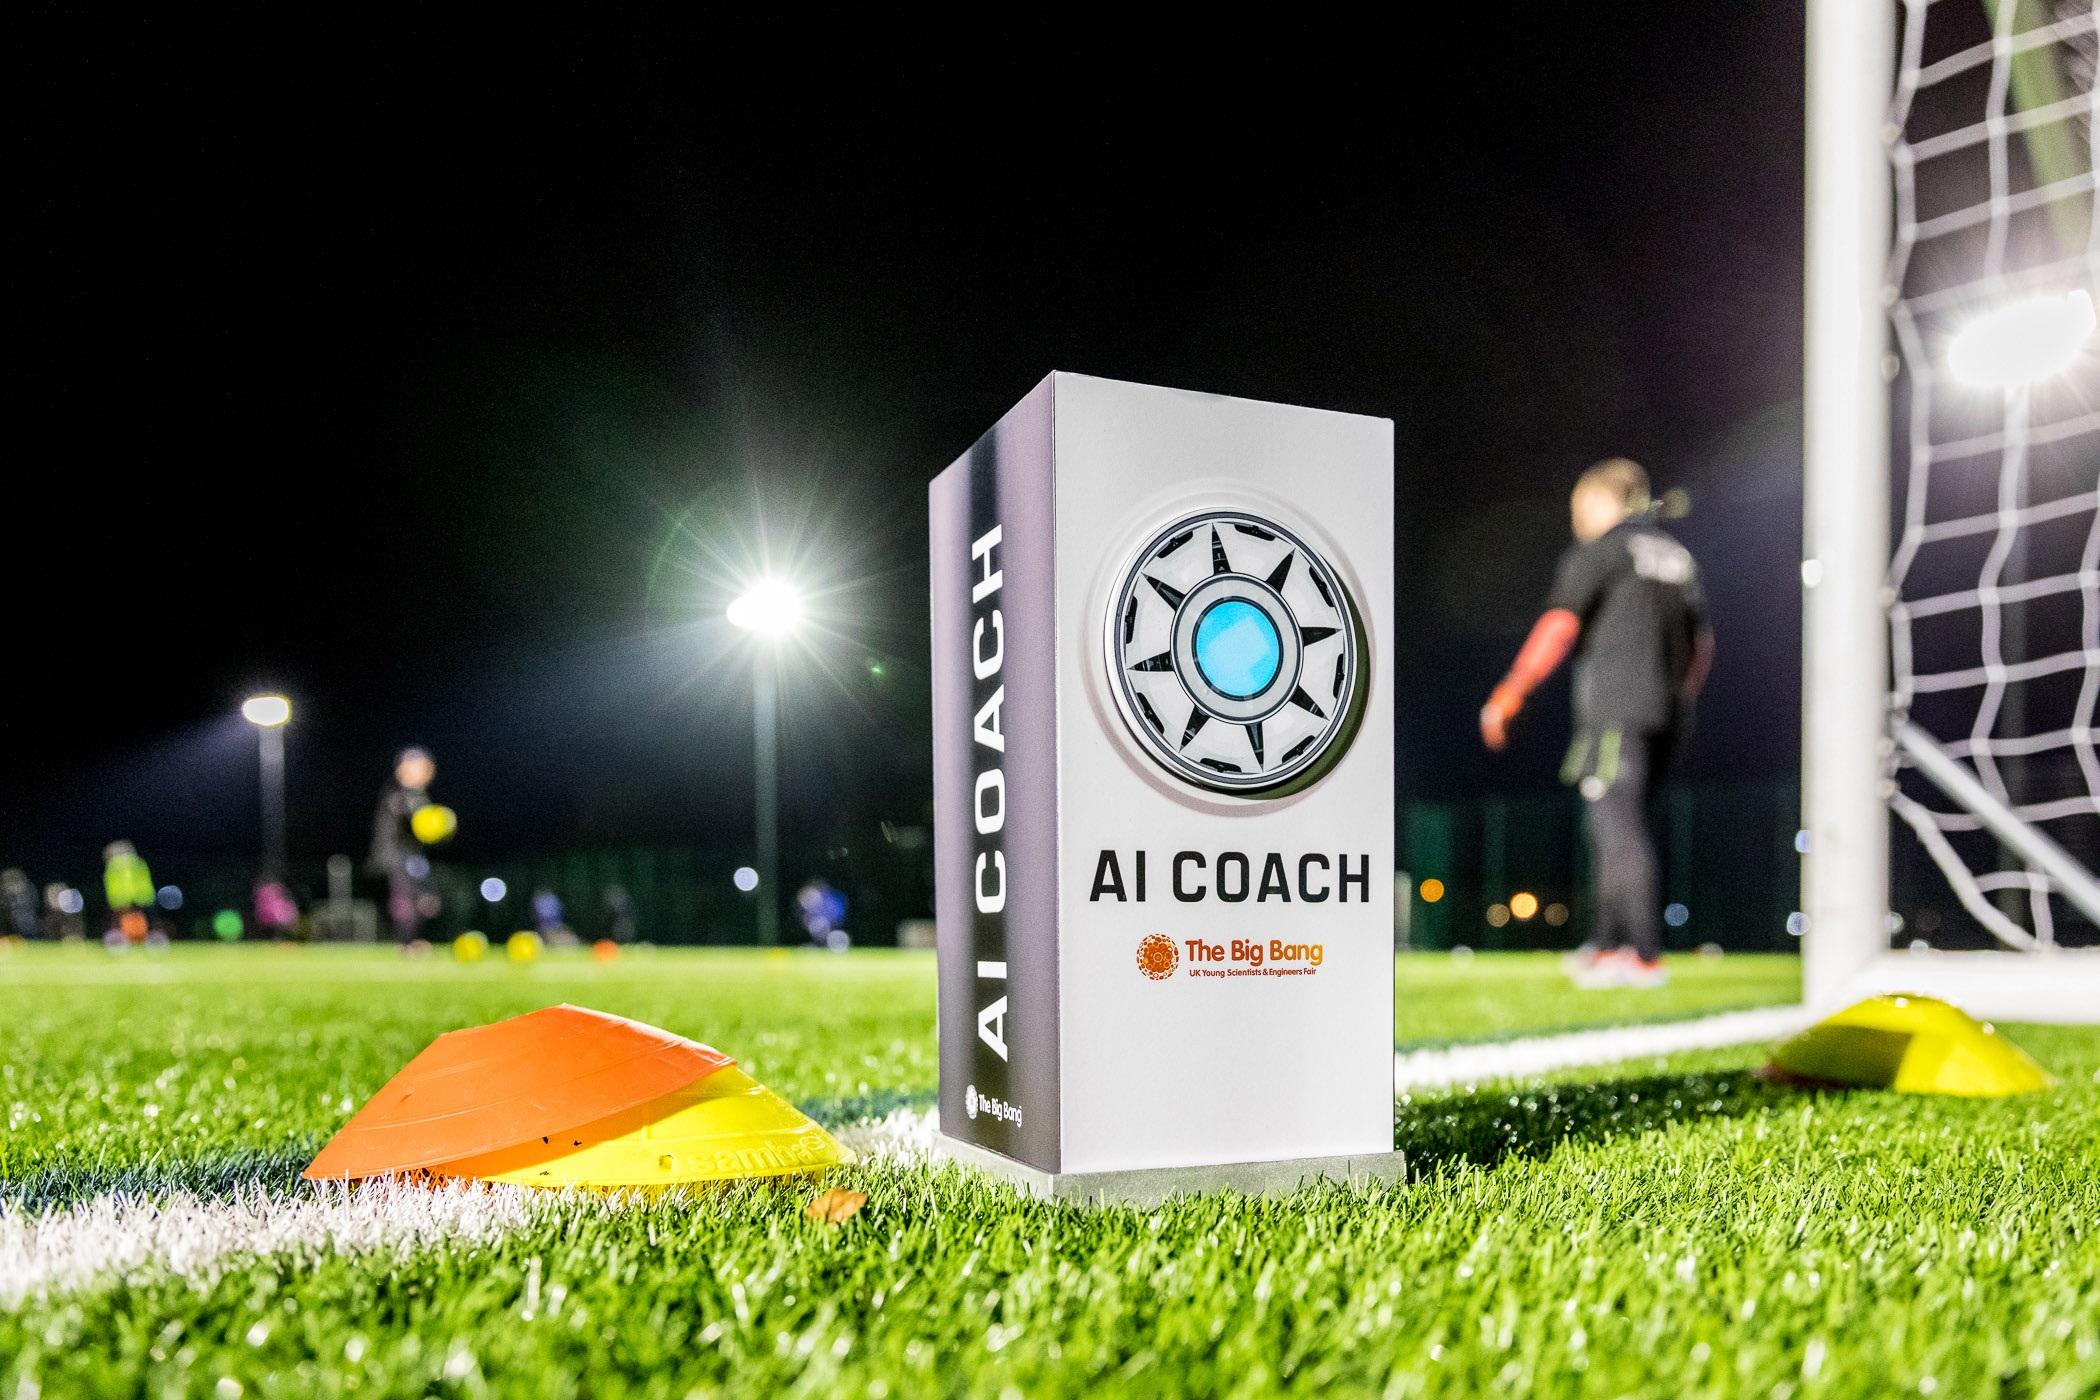 Football minnows Wingate & Finchley FC, who currently play in the Isthmian Premier League, have partnered with The Big Bang Fair to appoint an AI as a football coach